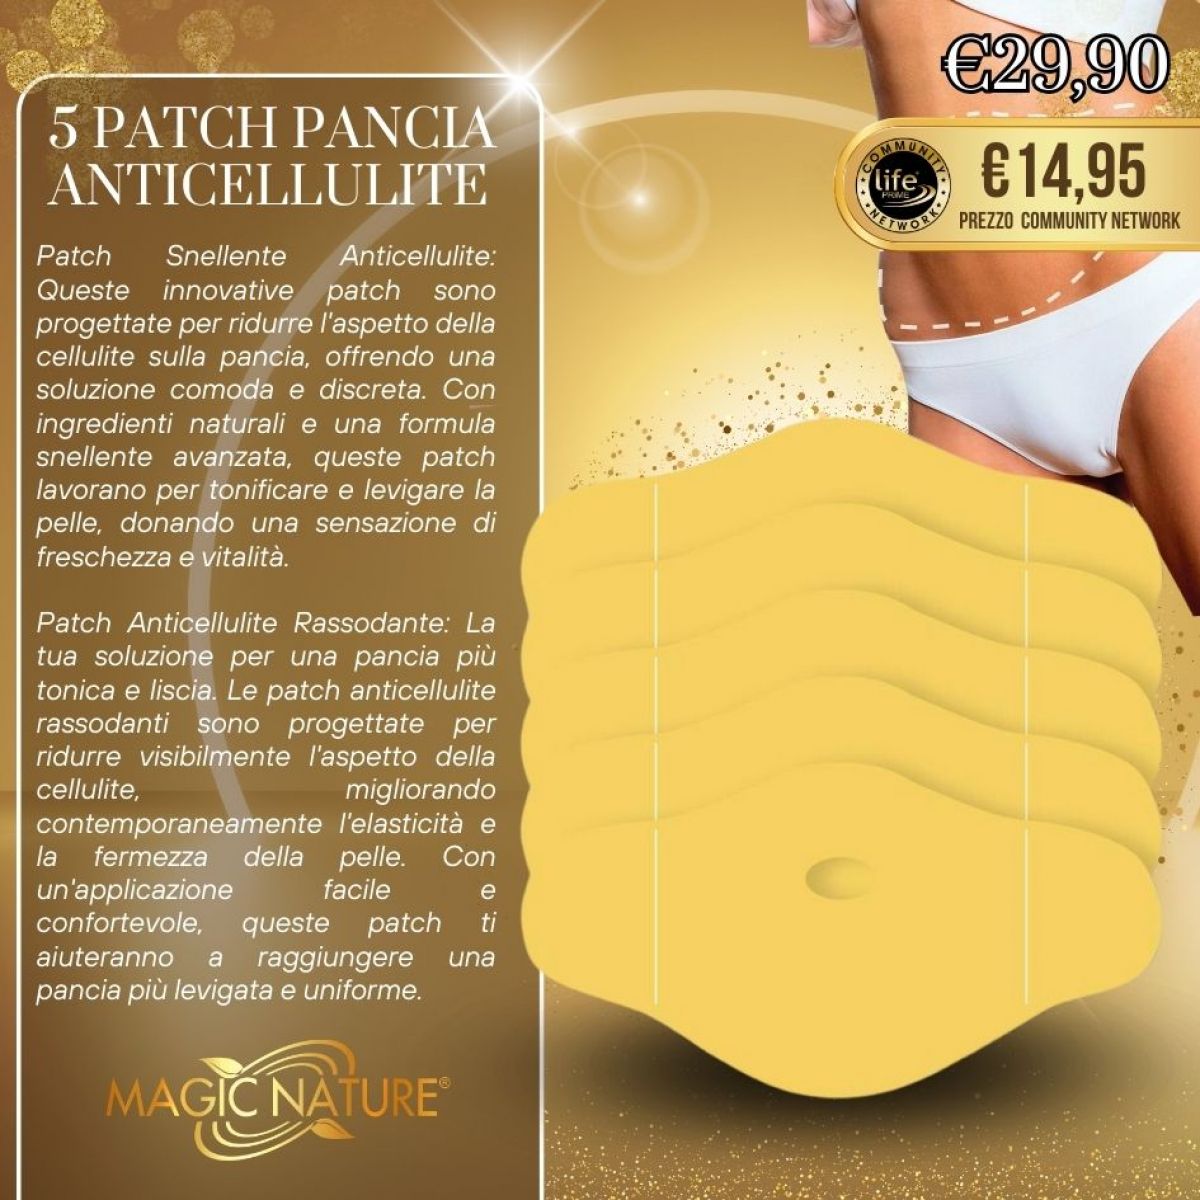 5 PATCH PANCIA ANTICELLULITE